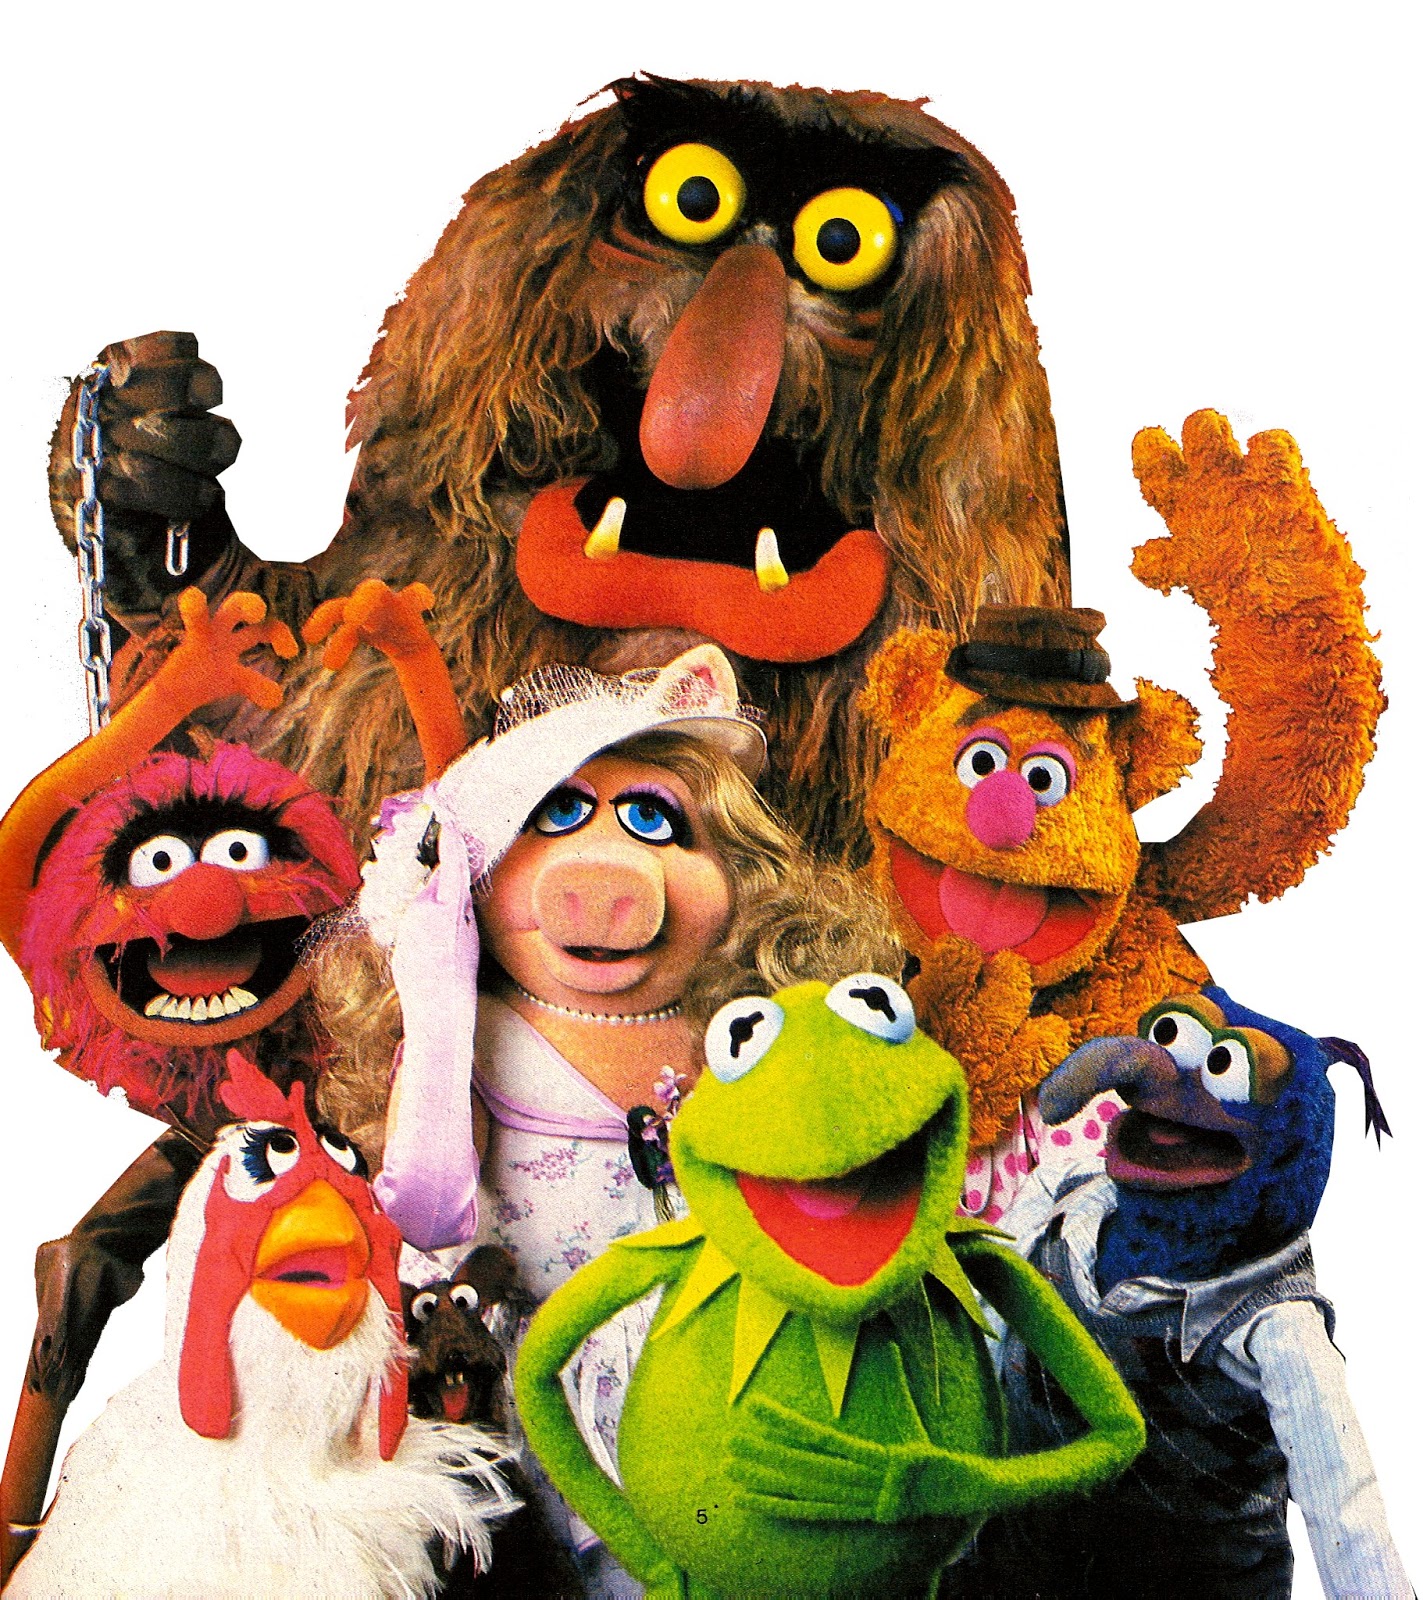 4.What is your favorite television program starring any of Jim Henson's